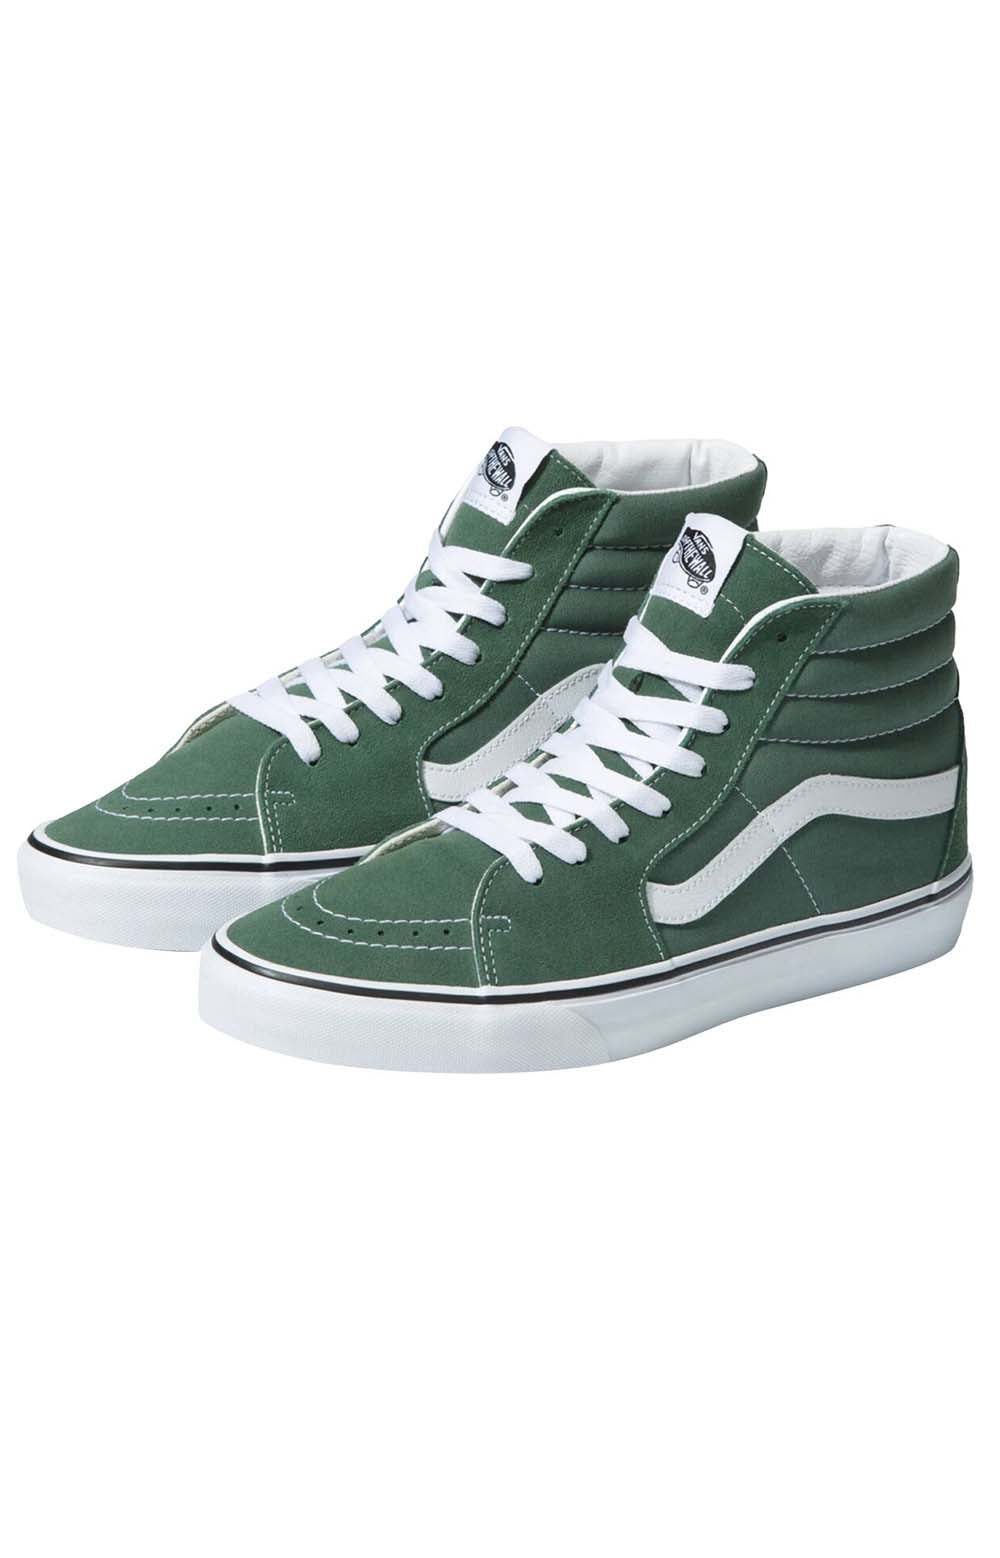 (Q5NYQW) Color Theory Sk8-Hi Shoes - Duck Green